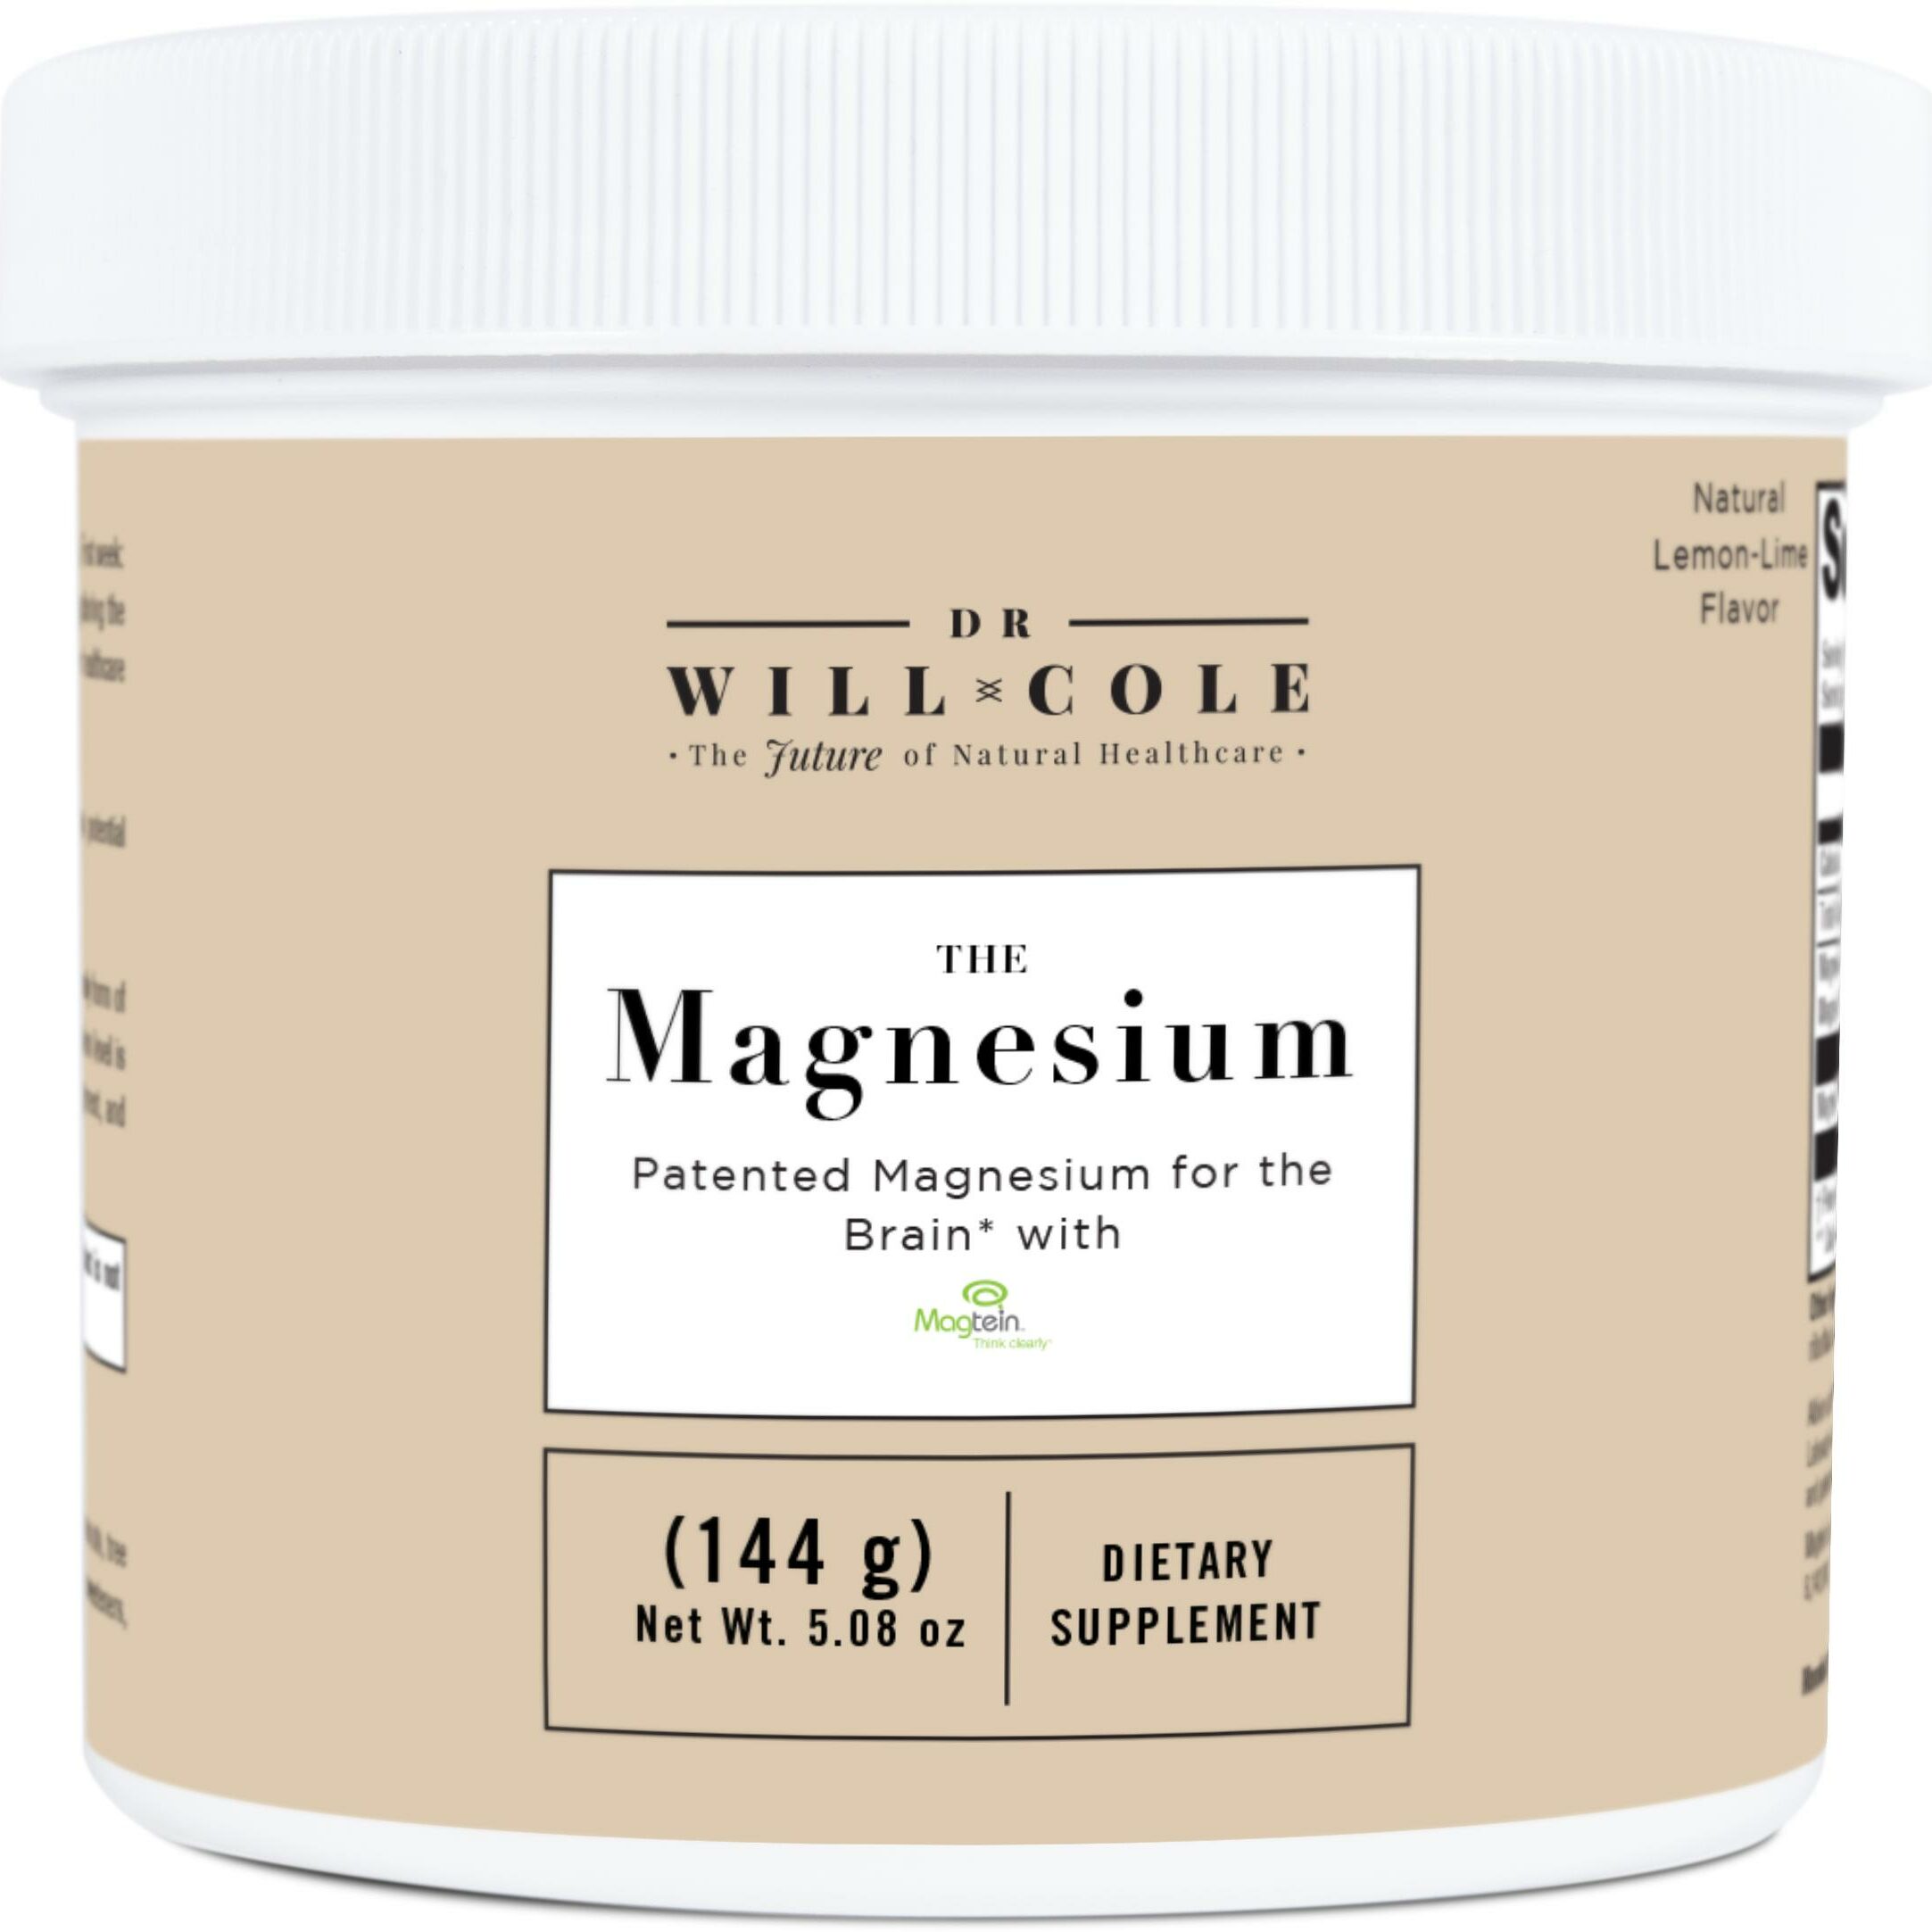 The Magnesium_5.29Oz_Opmagnl_Colewil